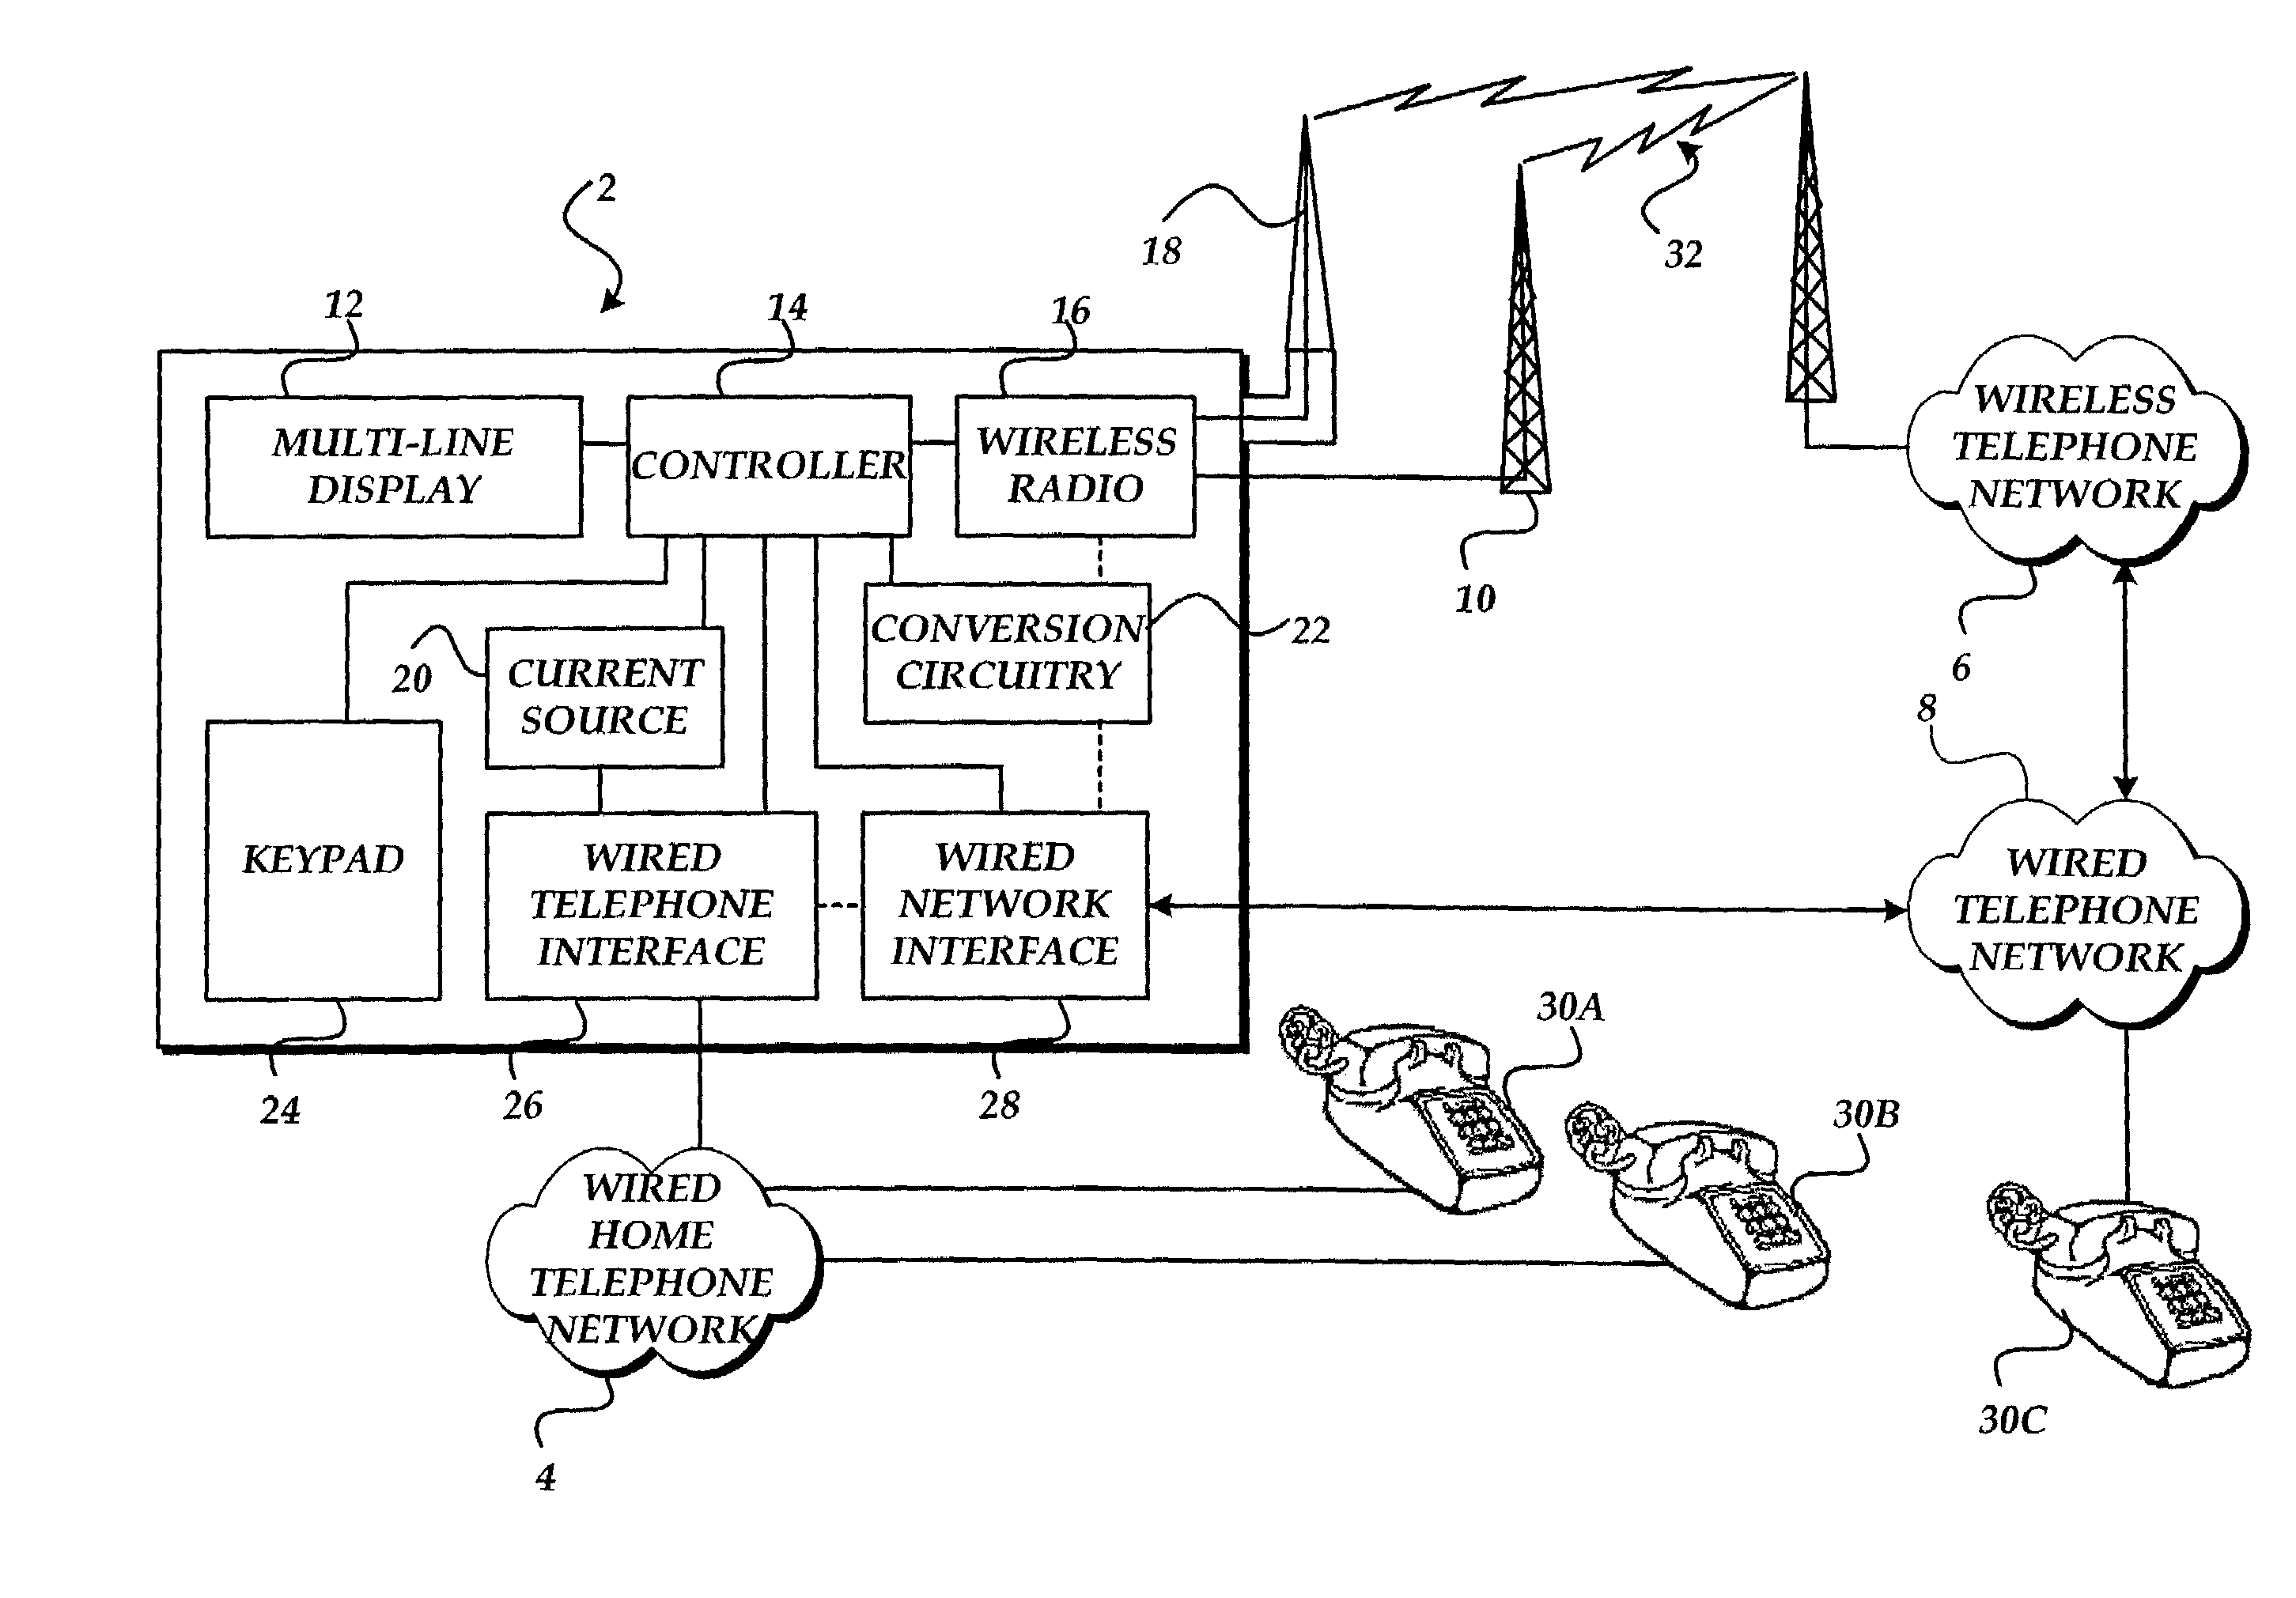 Apparatus for providing a gateway between a wired telephone and a wireless telephone network